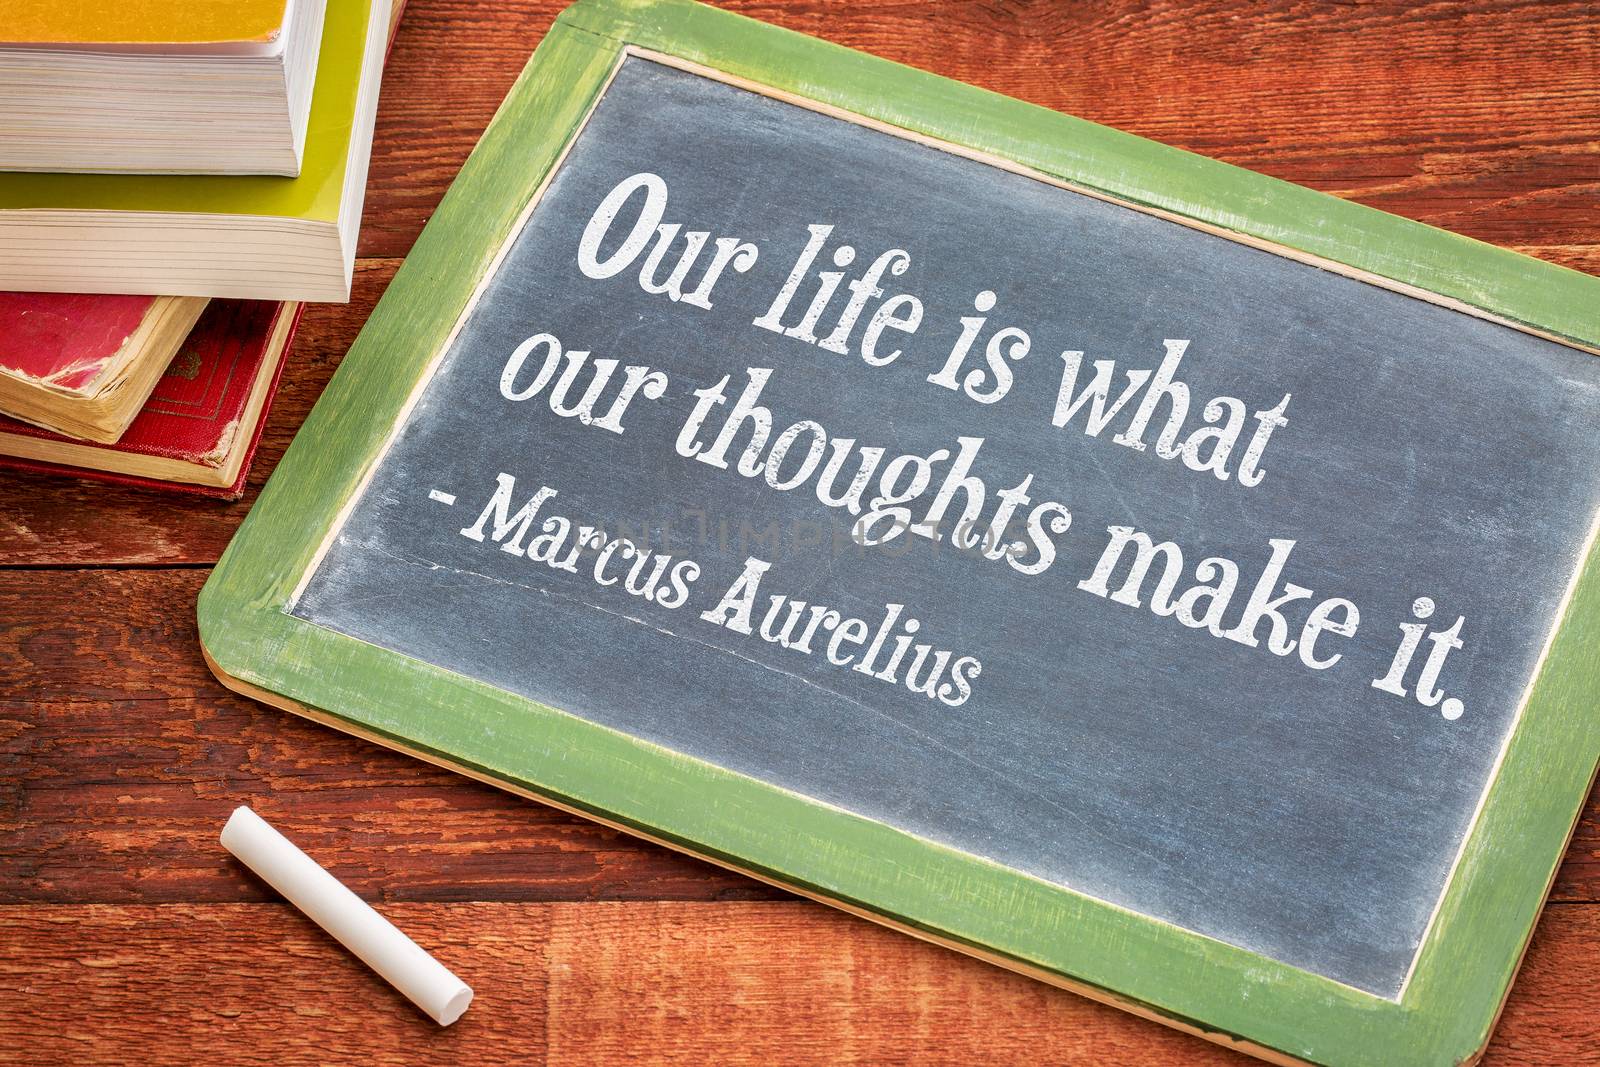 Marcus Aurelius on life and thoughts by PixelsAway